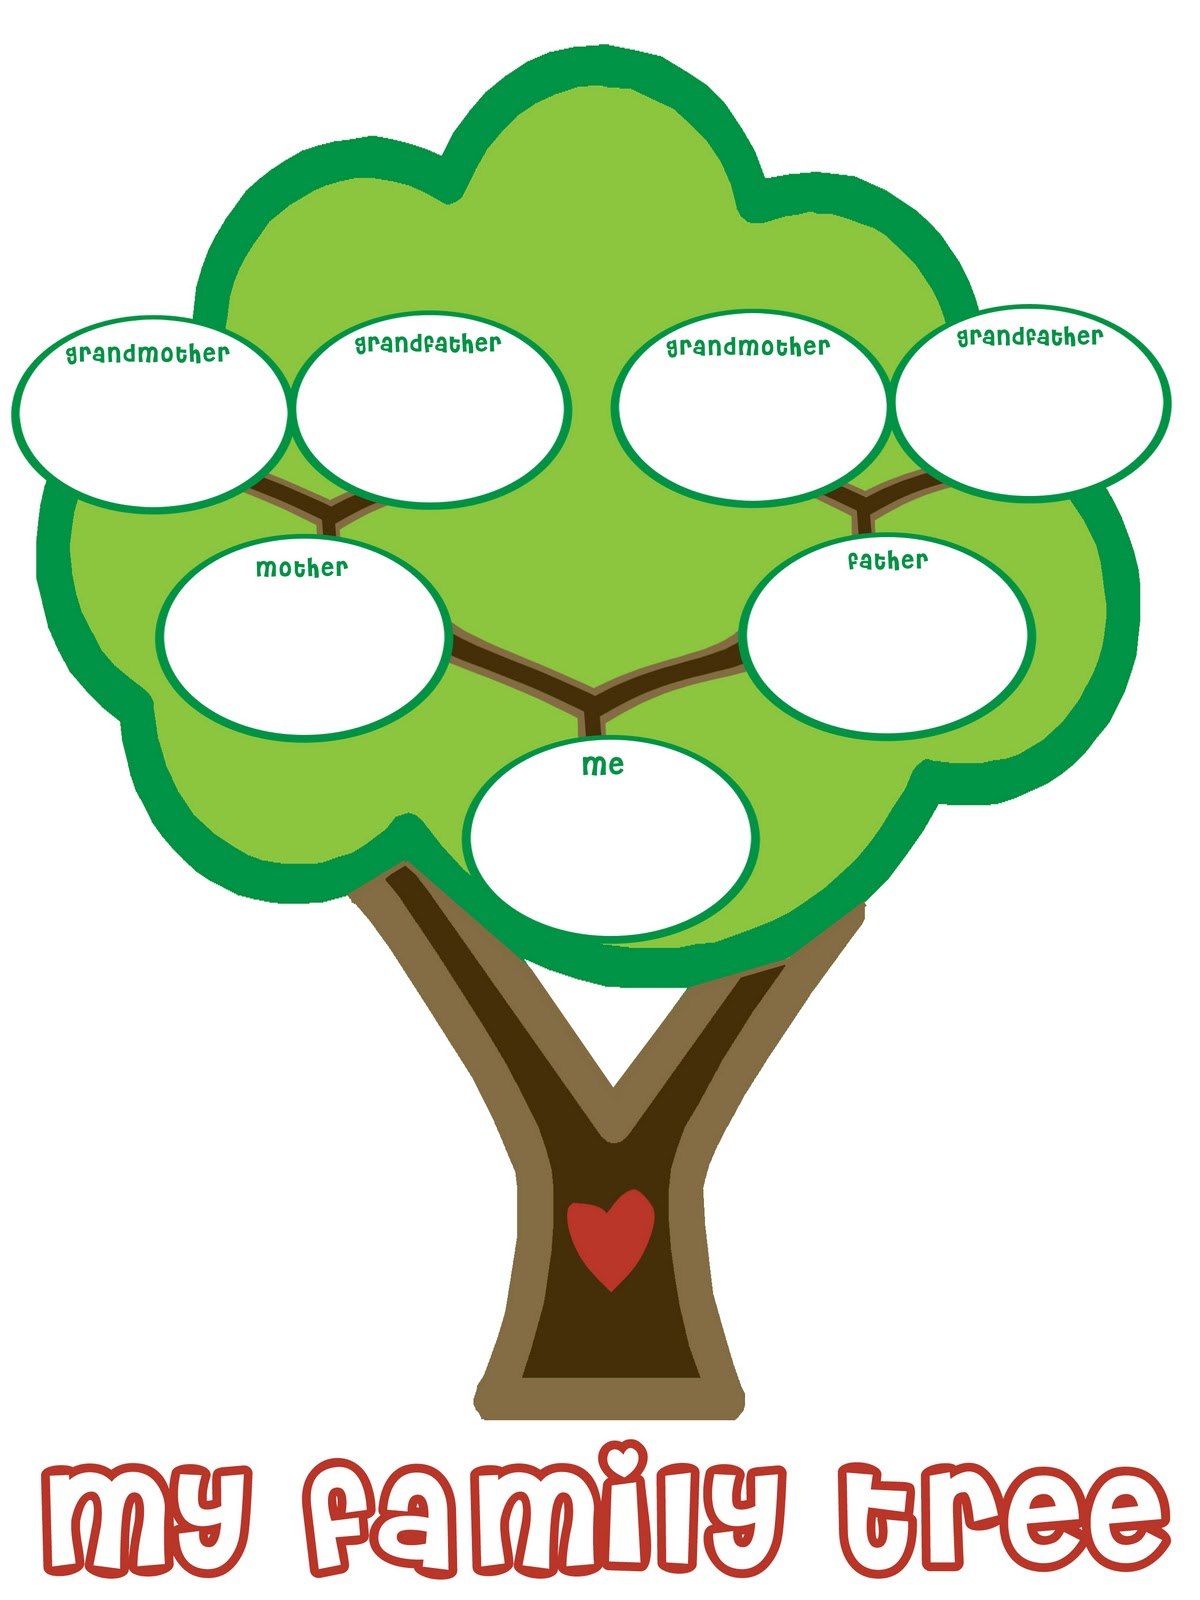 15 Blank Family Tree For Kids Free Cliparts That You Can Download To